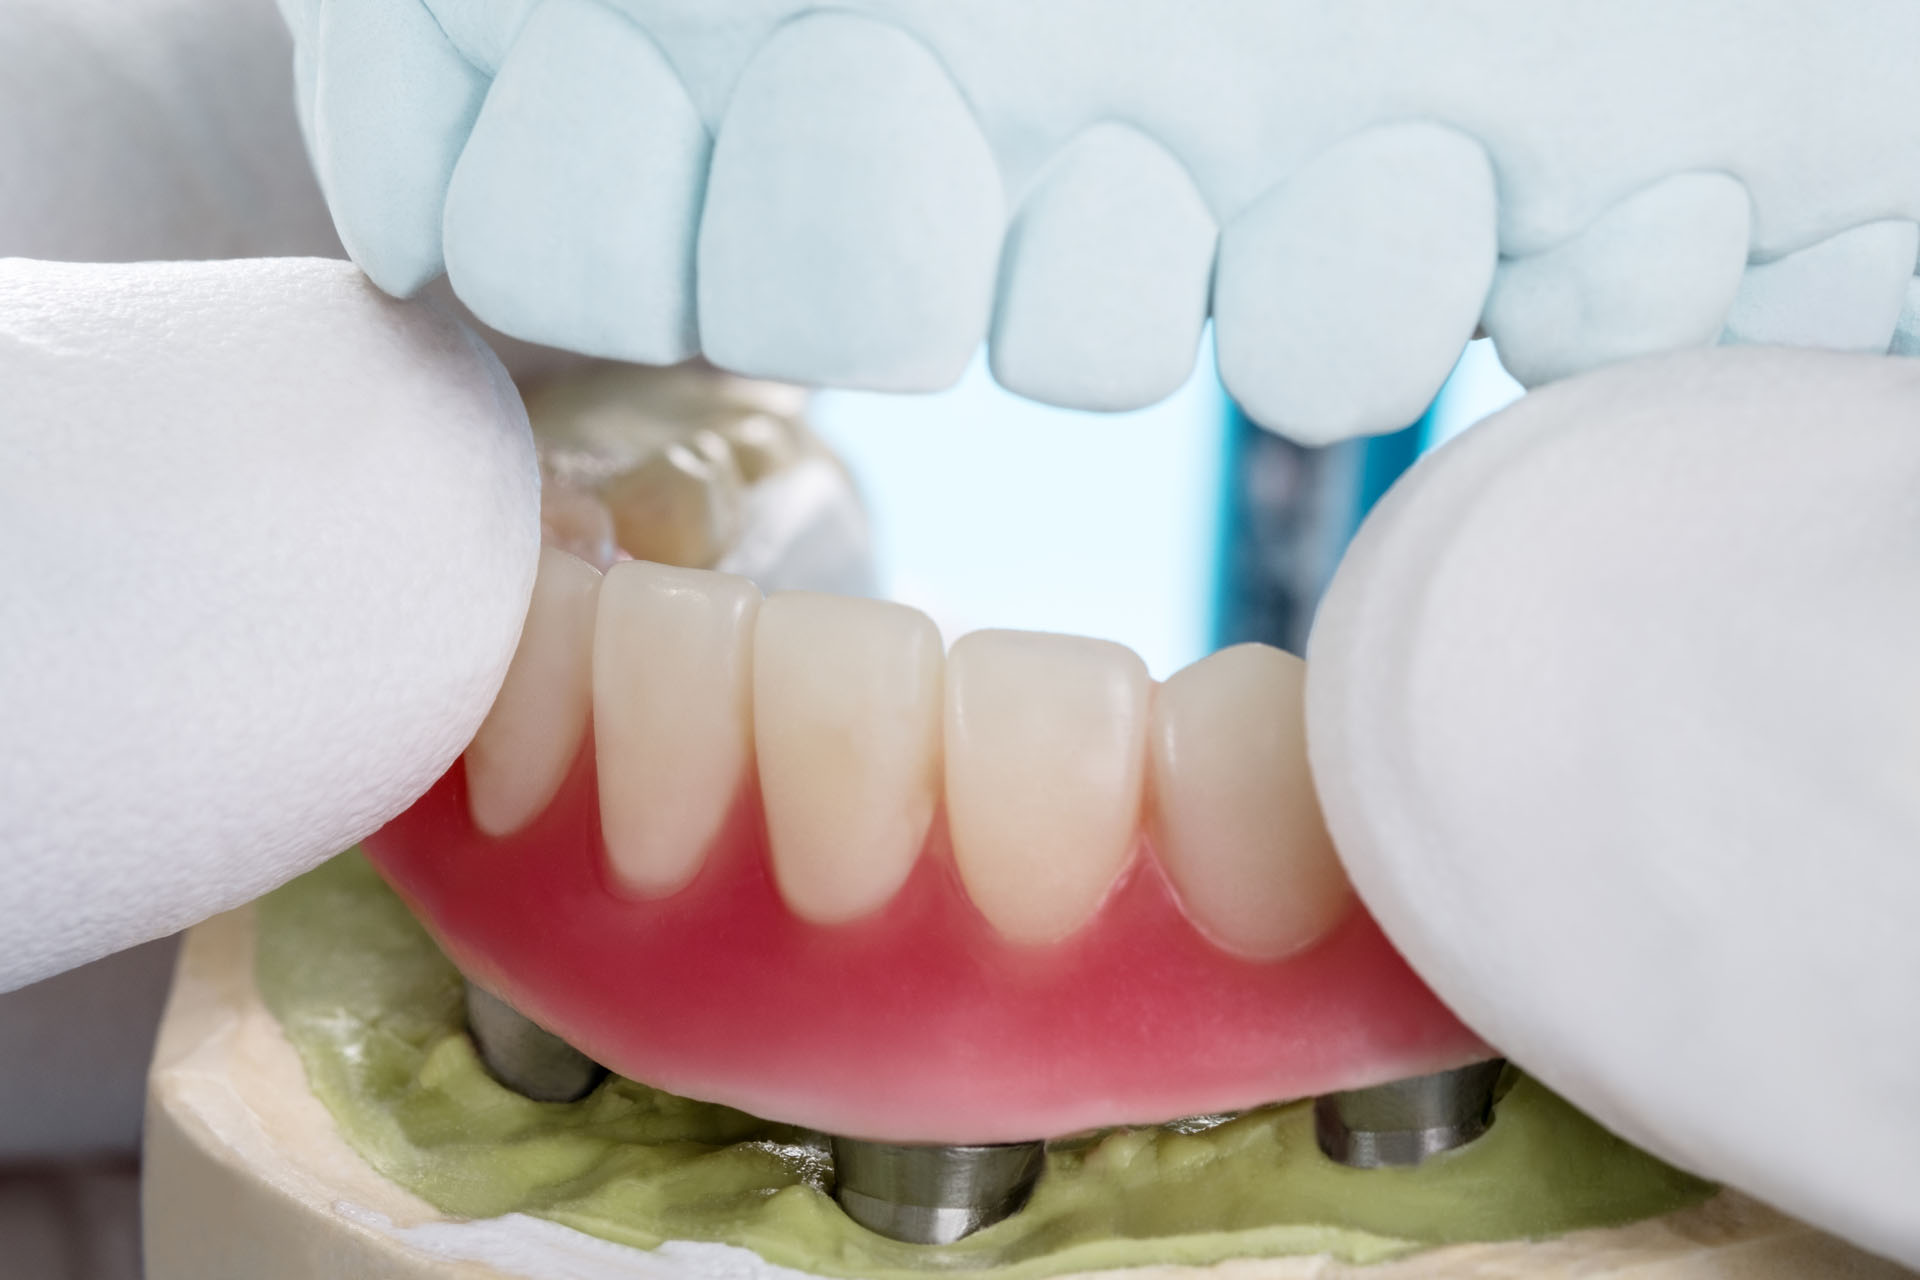 https://shifadentalclinic.in/wp-content/uploads/2020/01/implant-supported-overdenture.jpg